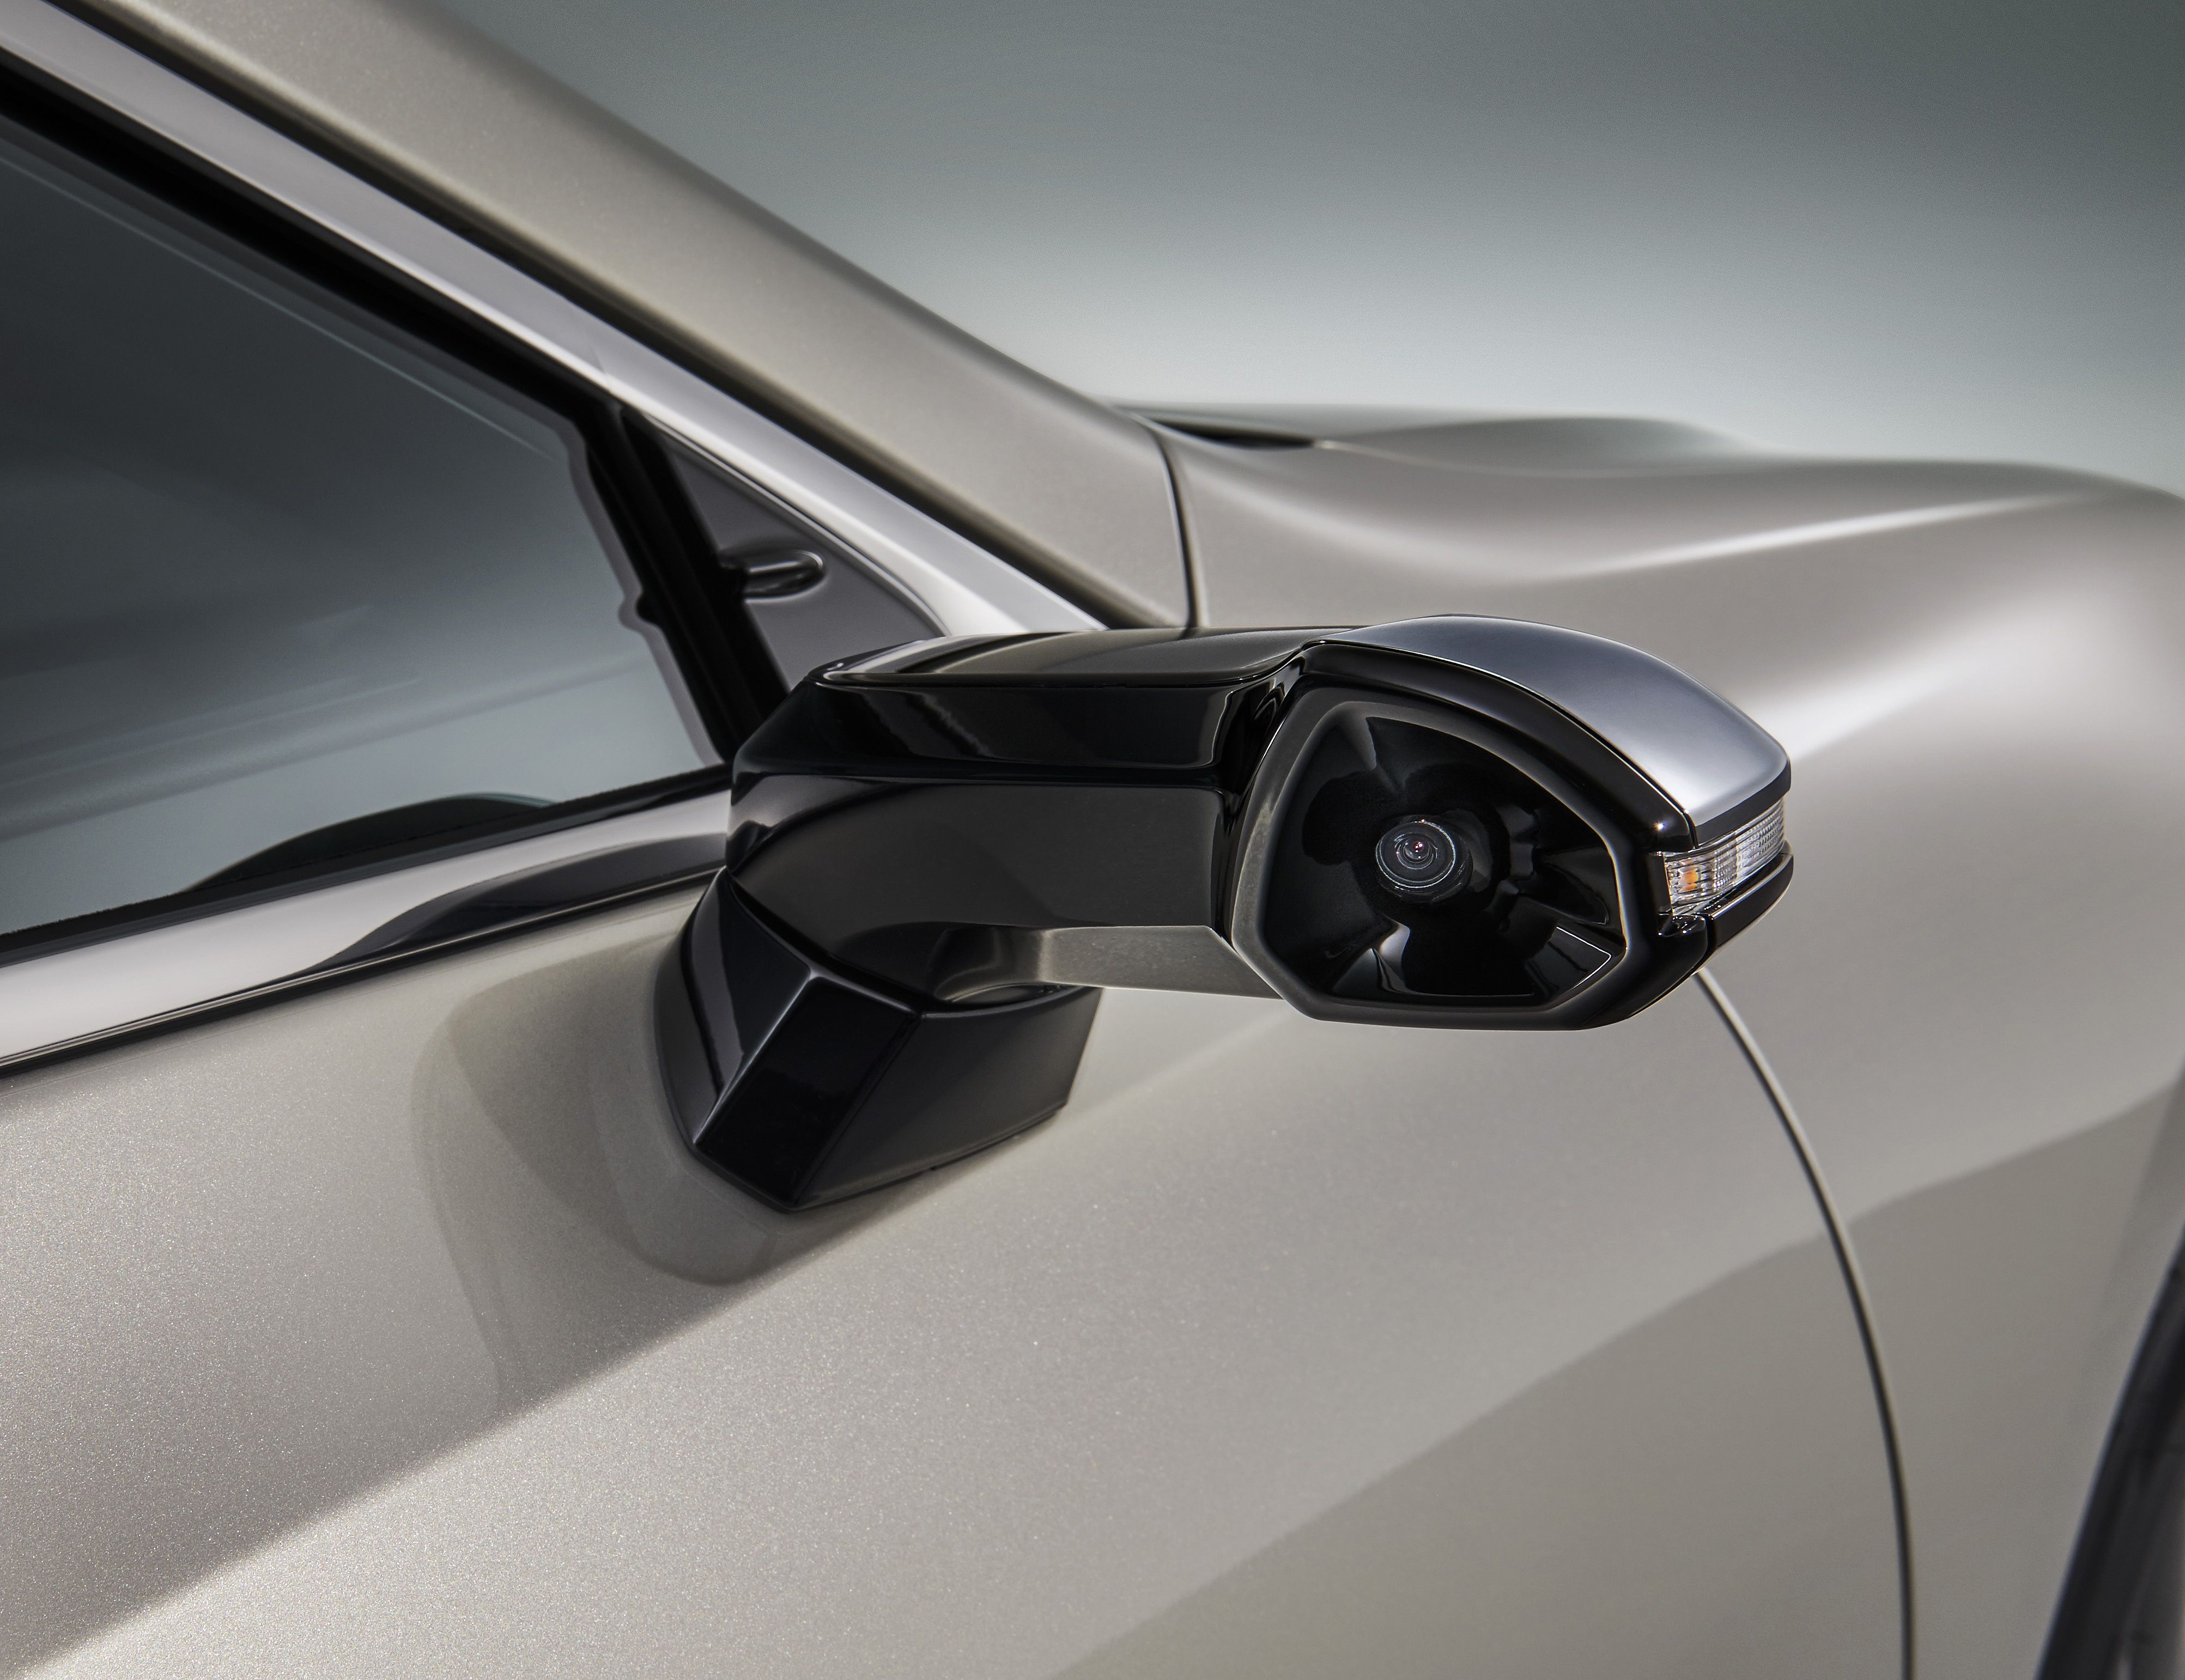 Car Side Mirrors Are Being Replaced By Cameras